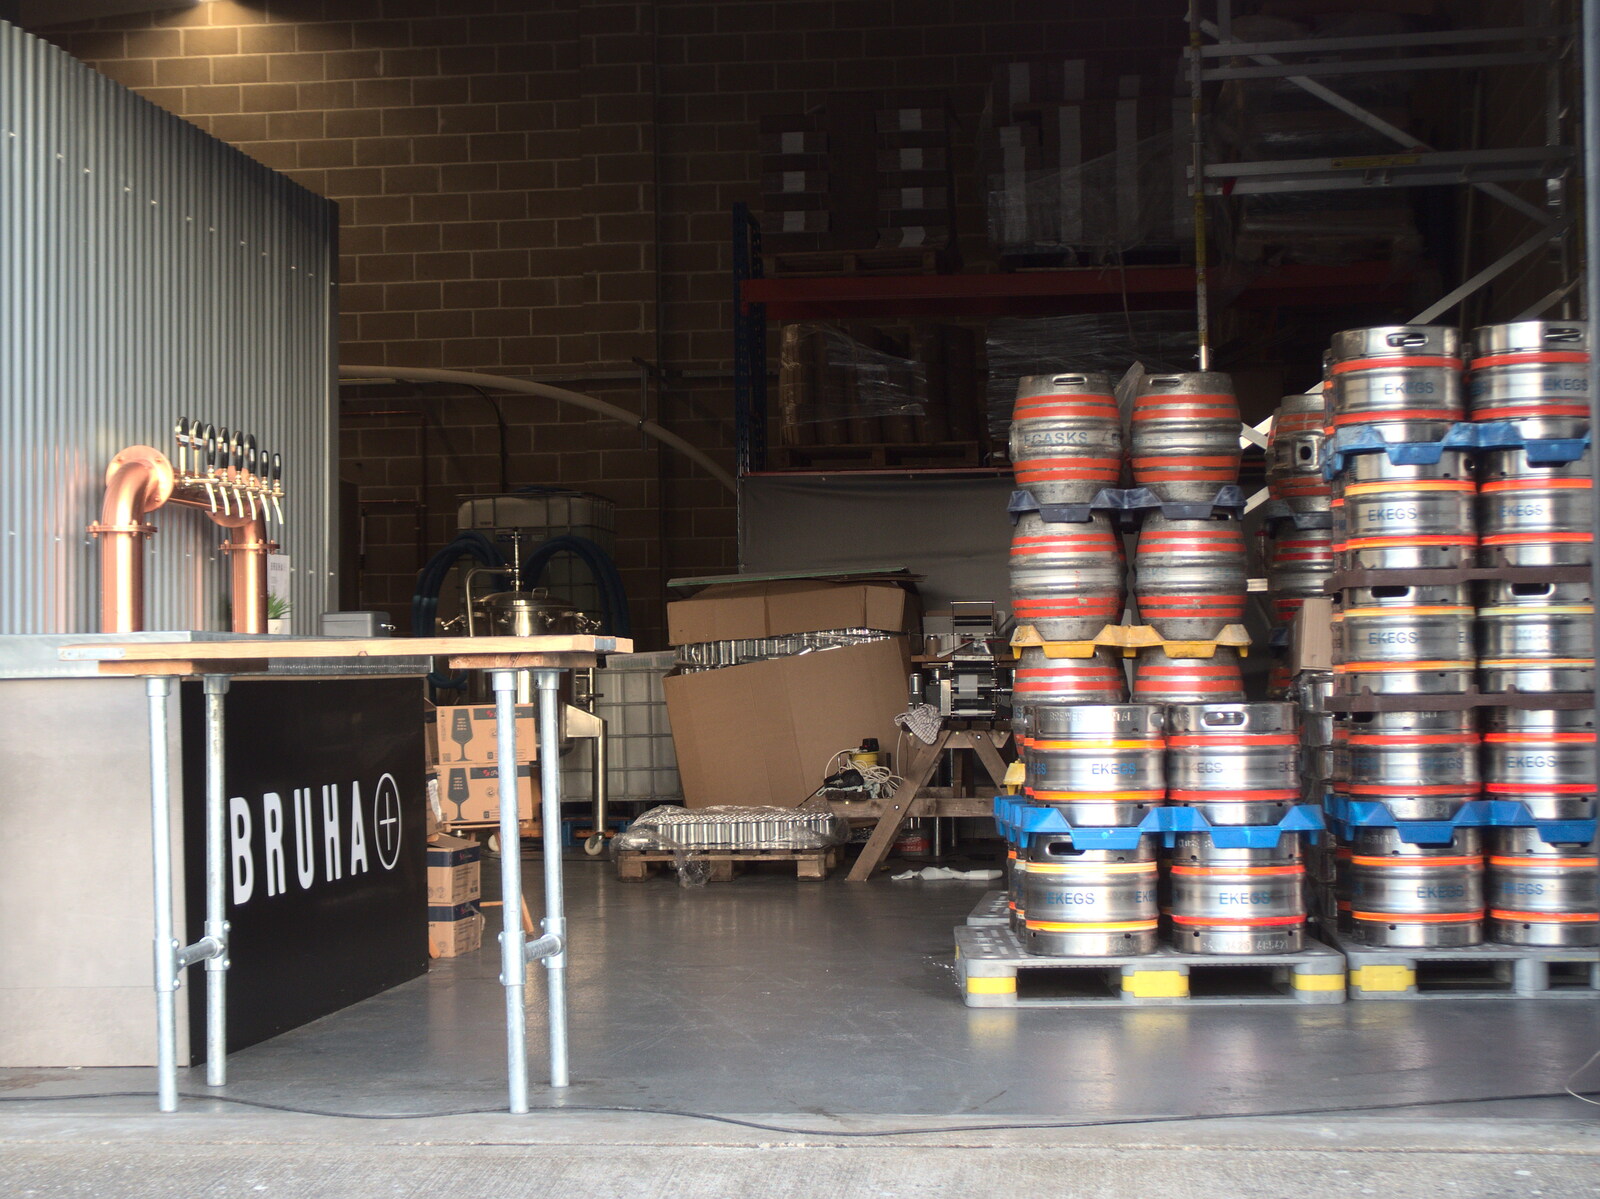 Bruha's kegs are stacked up from Hares, Tortoises and Station 119, Eye, Suffolk - 19th July 2021